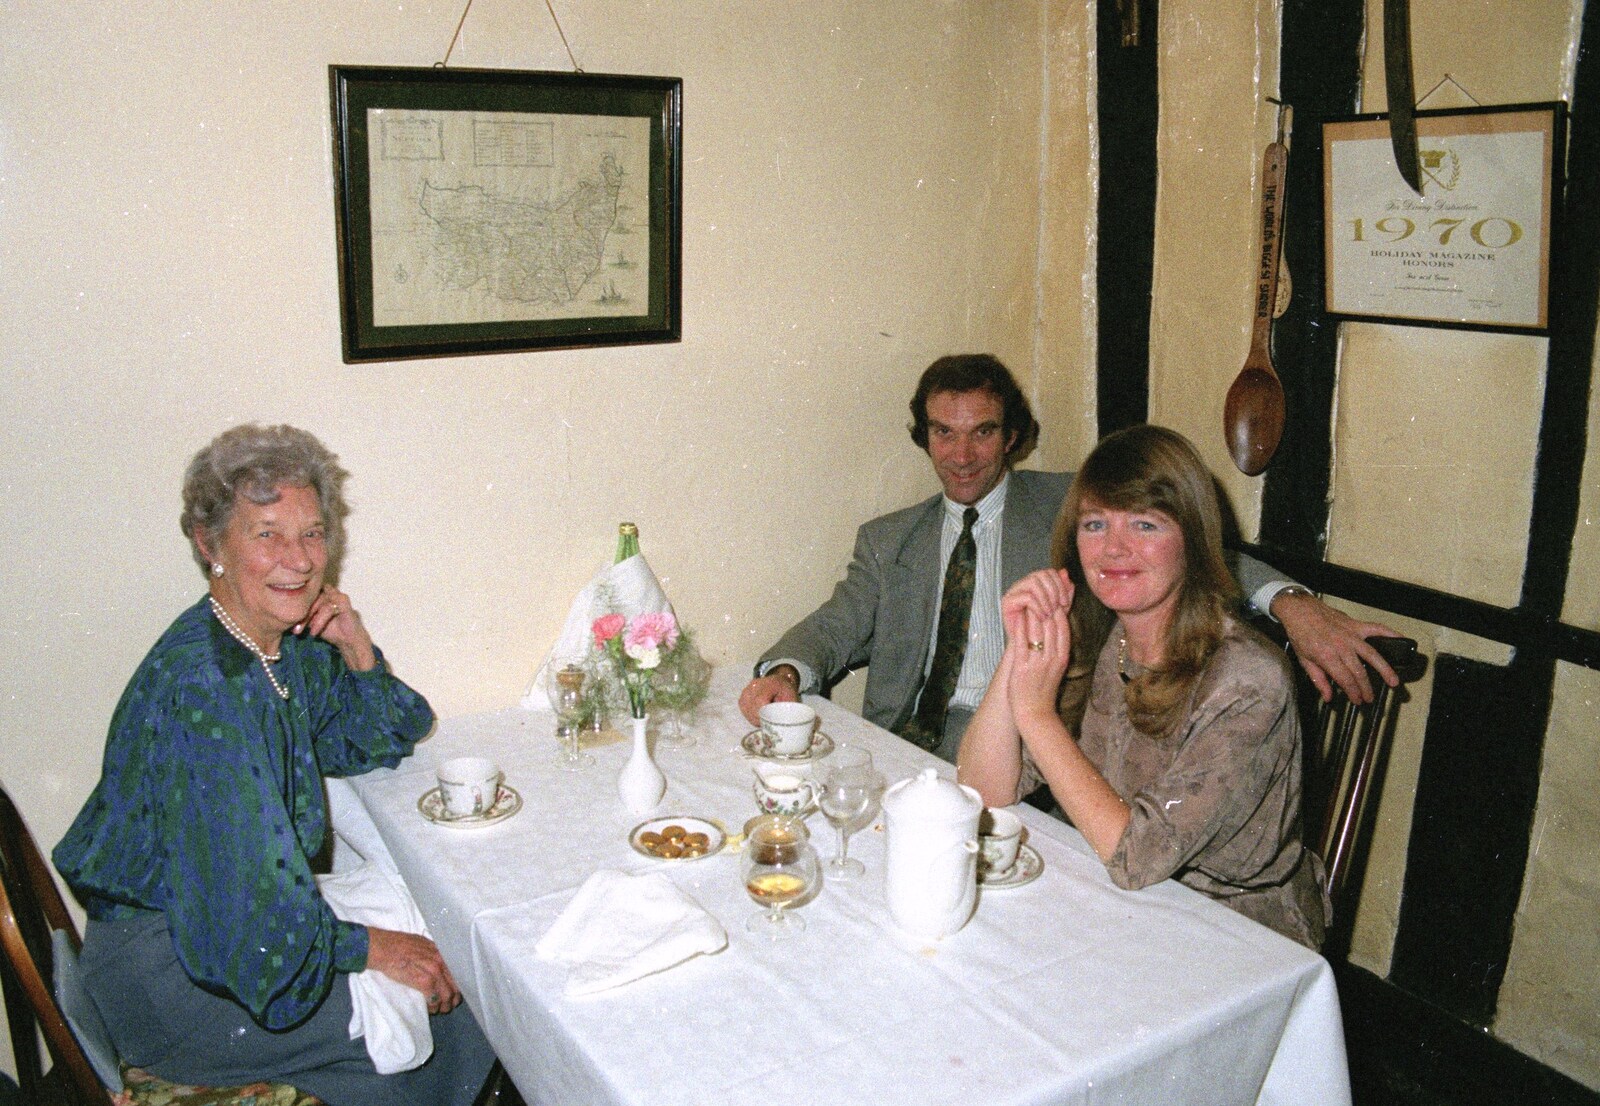 Post-dinner coffee in the Fox and Goose from Mother, Mike and Sean Visit, Stuston, Suffolk - 1st September 1989